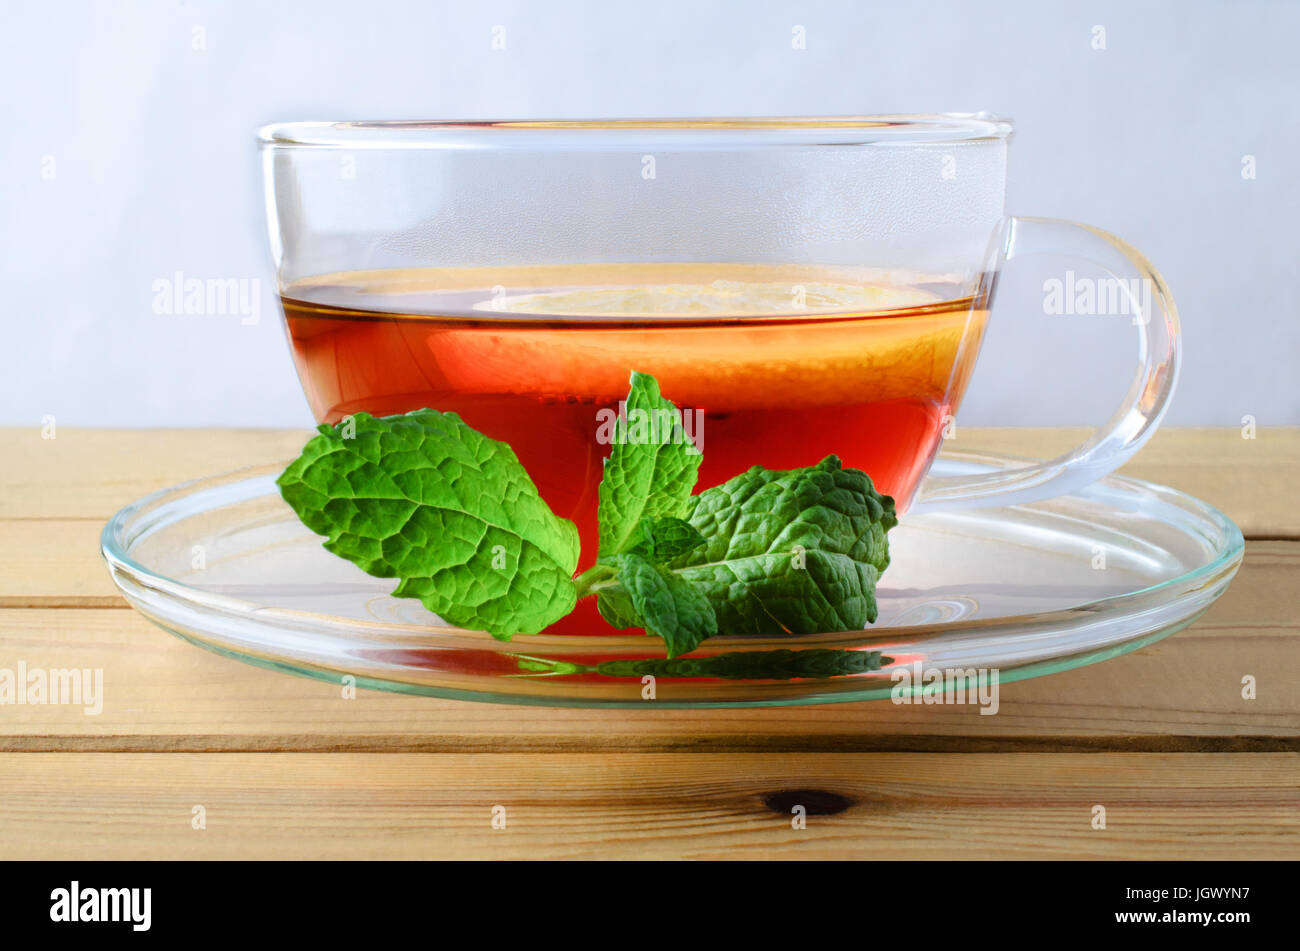 Close up of a glass cup of lemon tea with floating lemon slice and a sprig of mint leaves on the saucer.  Resting on a wood planked table and shot at  Stock Photo